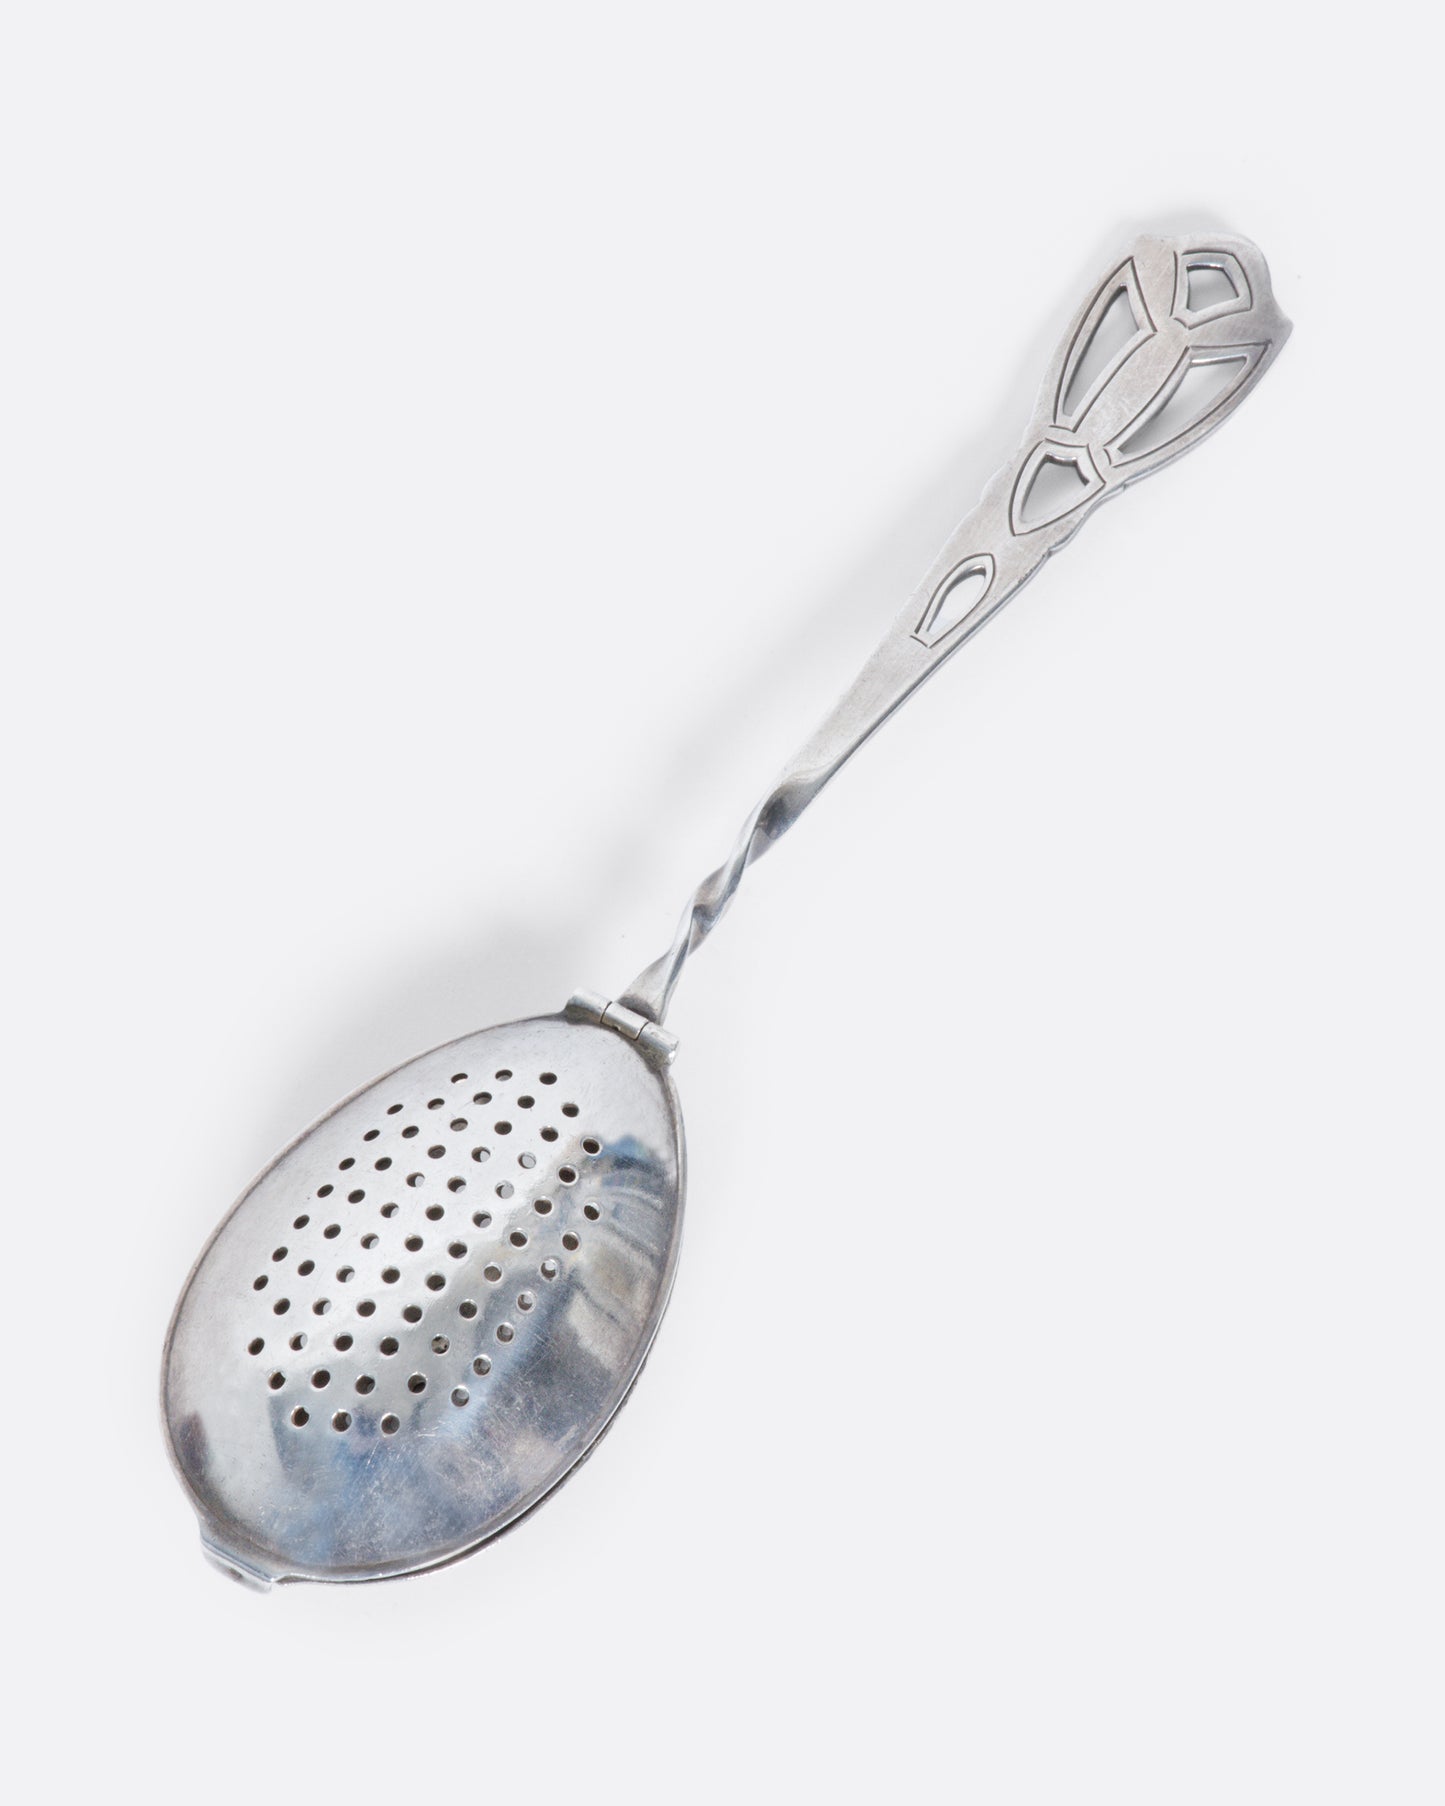 A perforated sterling silver spoon with a detailed cutout handle and a hinged perforated lid to create a tea diffuser.